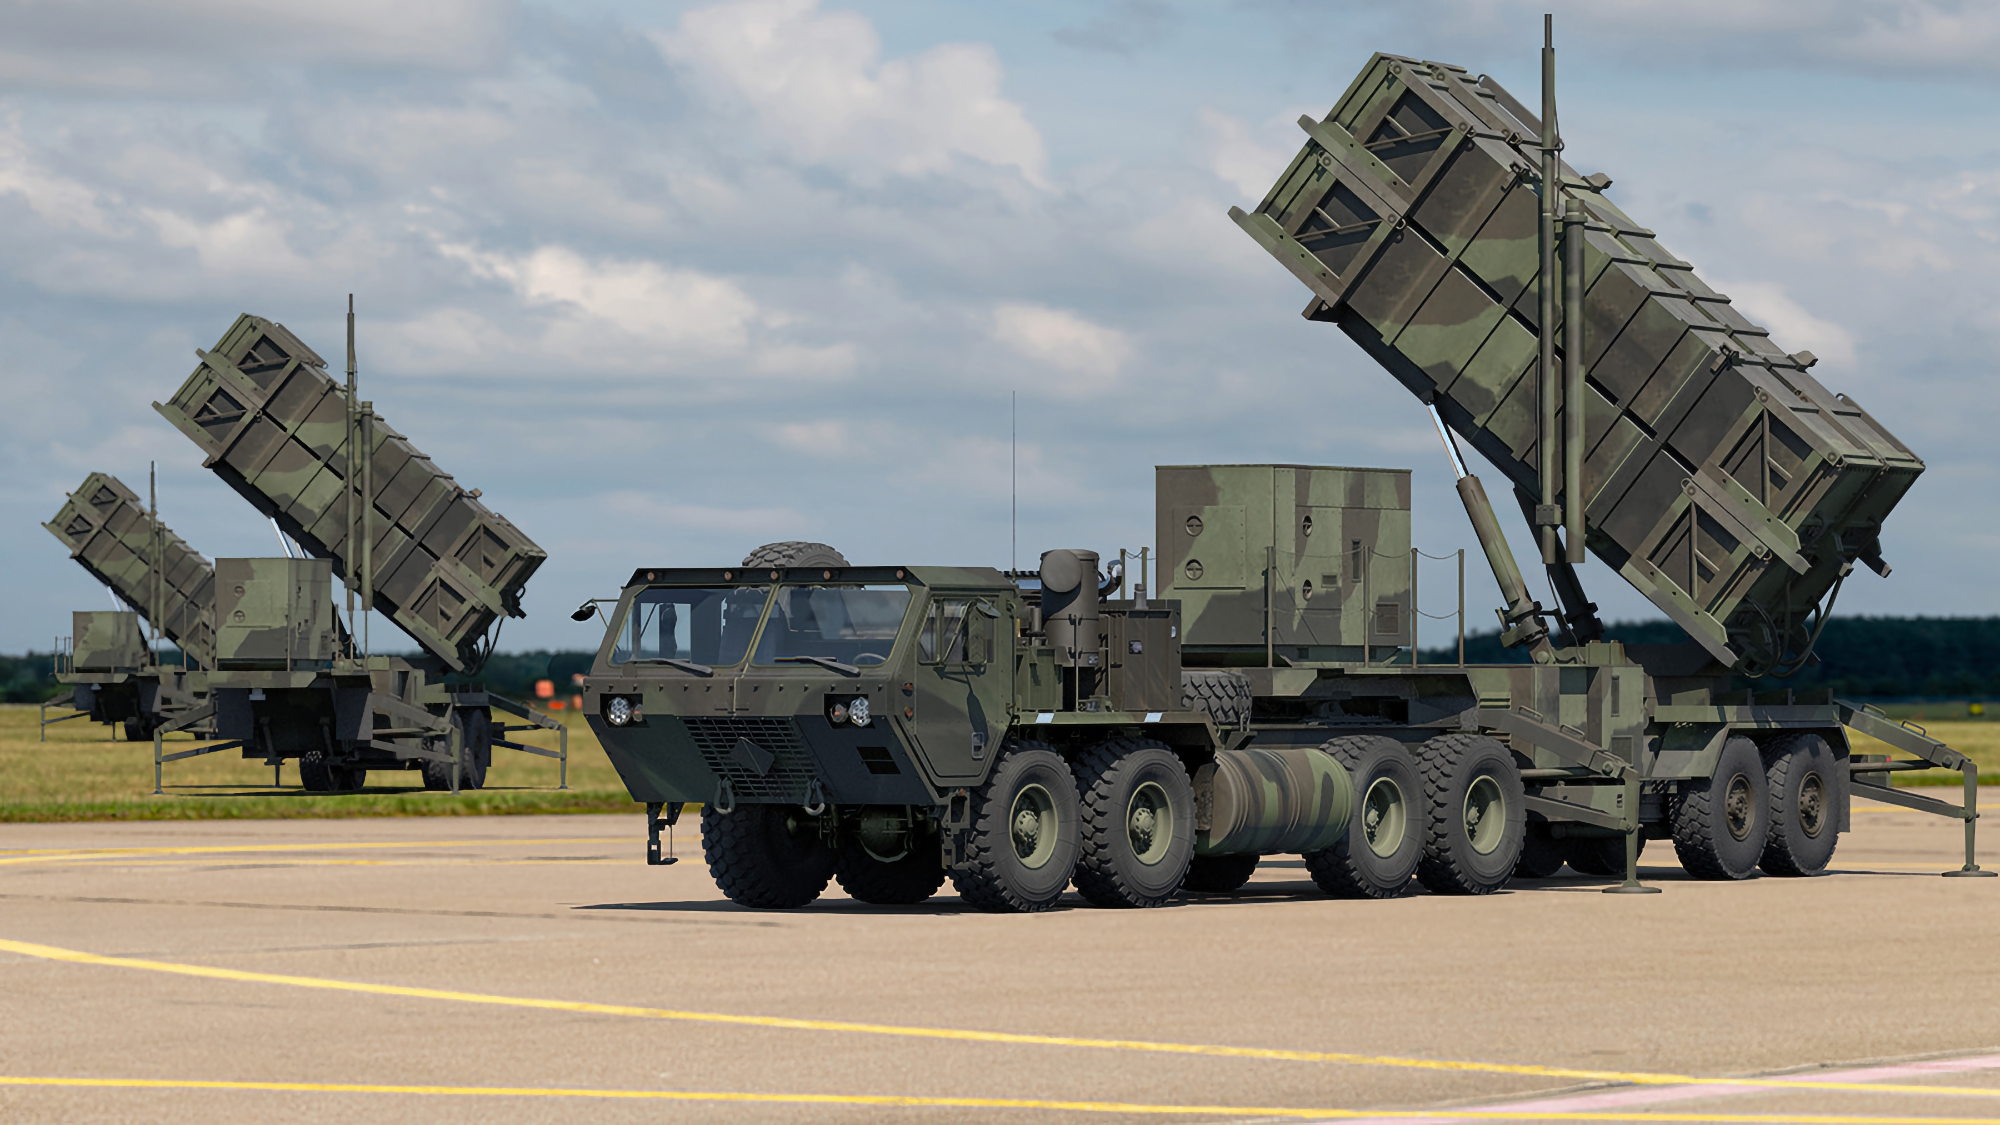 Patriot SAMs, TRML-4D radars, shells for Leopard 1 tanks and Vector UAVs: Germany hands Ukraine new military aid package